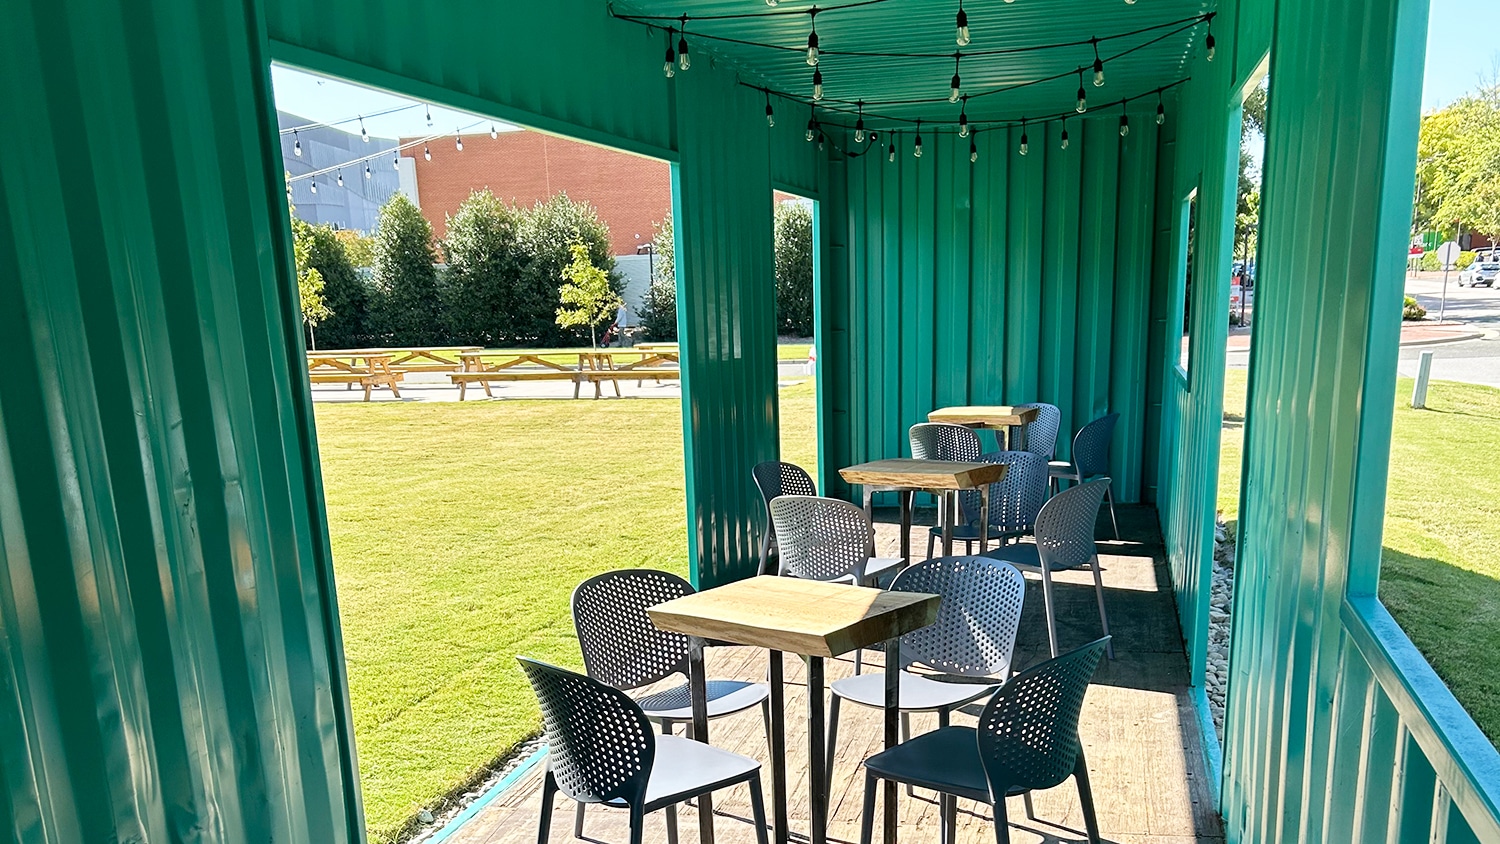 Interior photo of green shipping container repurposed as a social gathering spot complete with chairs and tables.